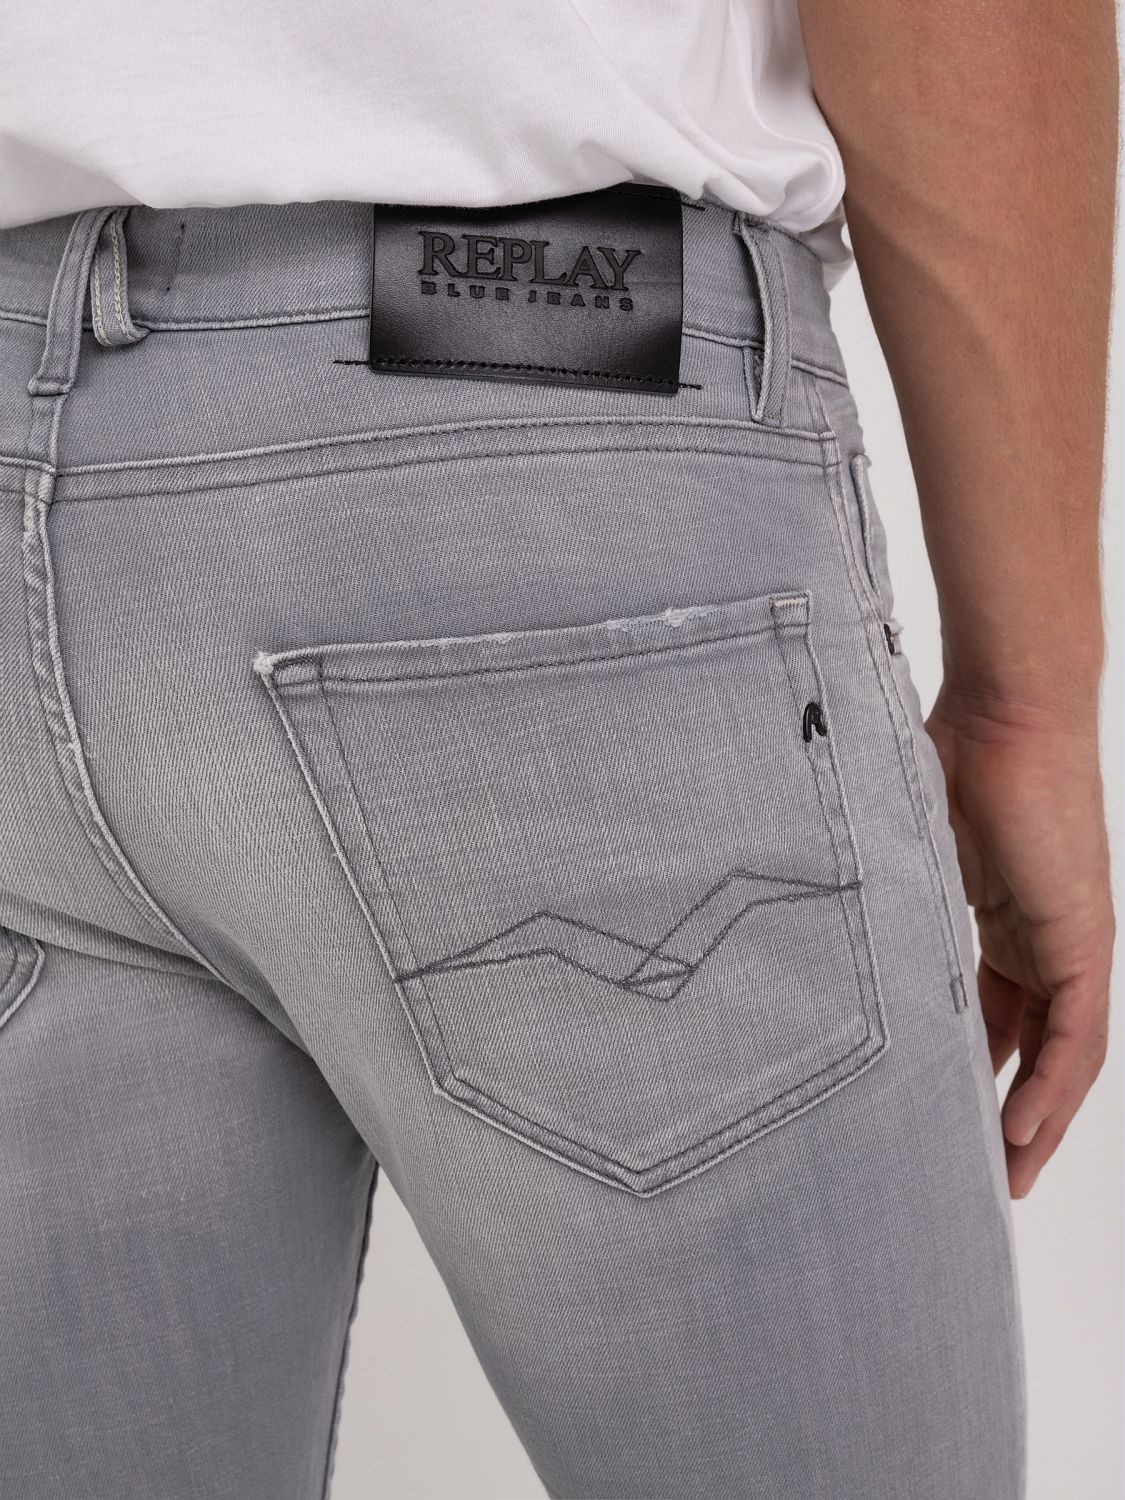 Slim fit Mickym jeans - Replay Jeans